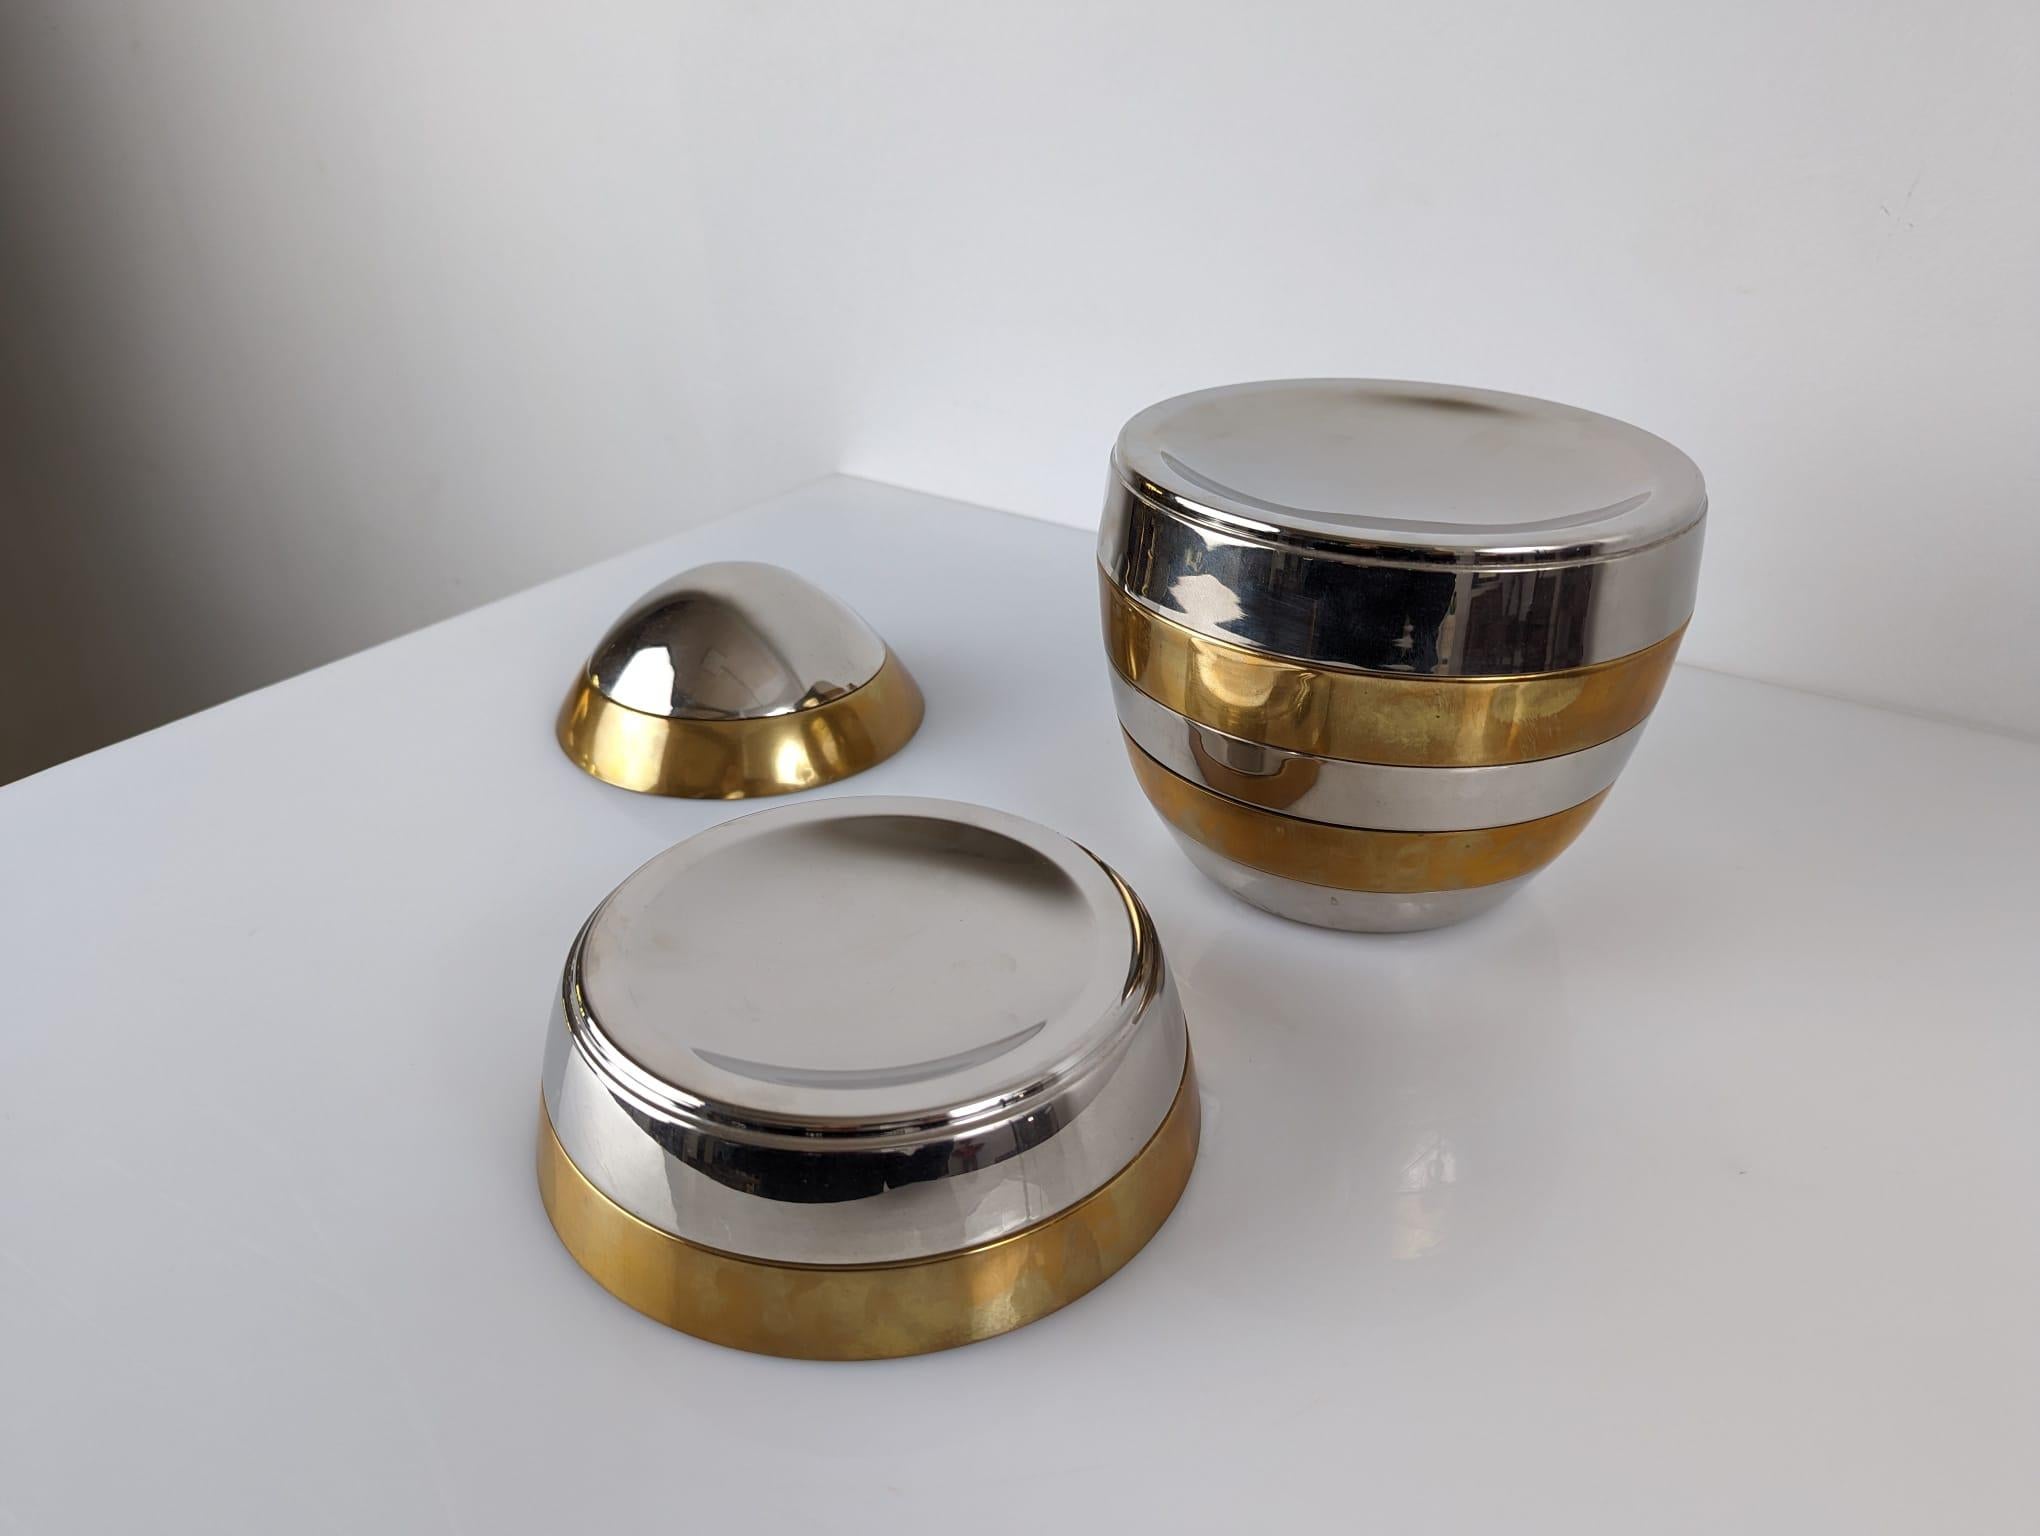 Fantastic sculpture made of brass and chrome designed by Tommaso Barbi in the 70s. It consists of nine stackable pieces of different sizes as trays that together create an elegant egg shape. A very exclusive and dynamic work, since it allows you to